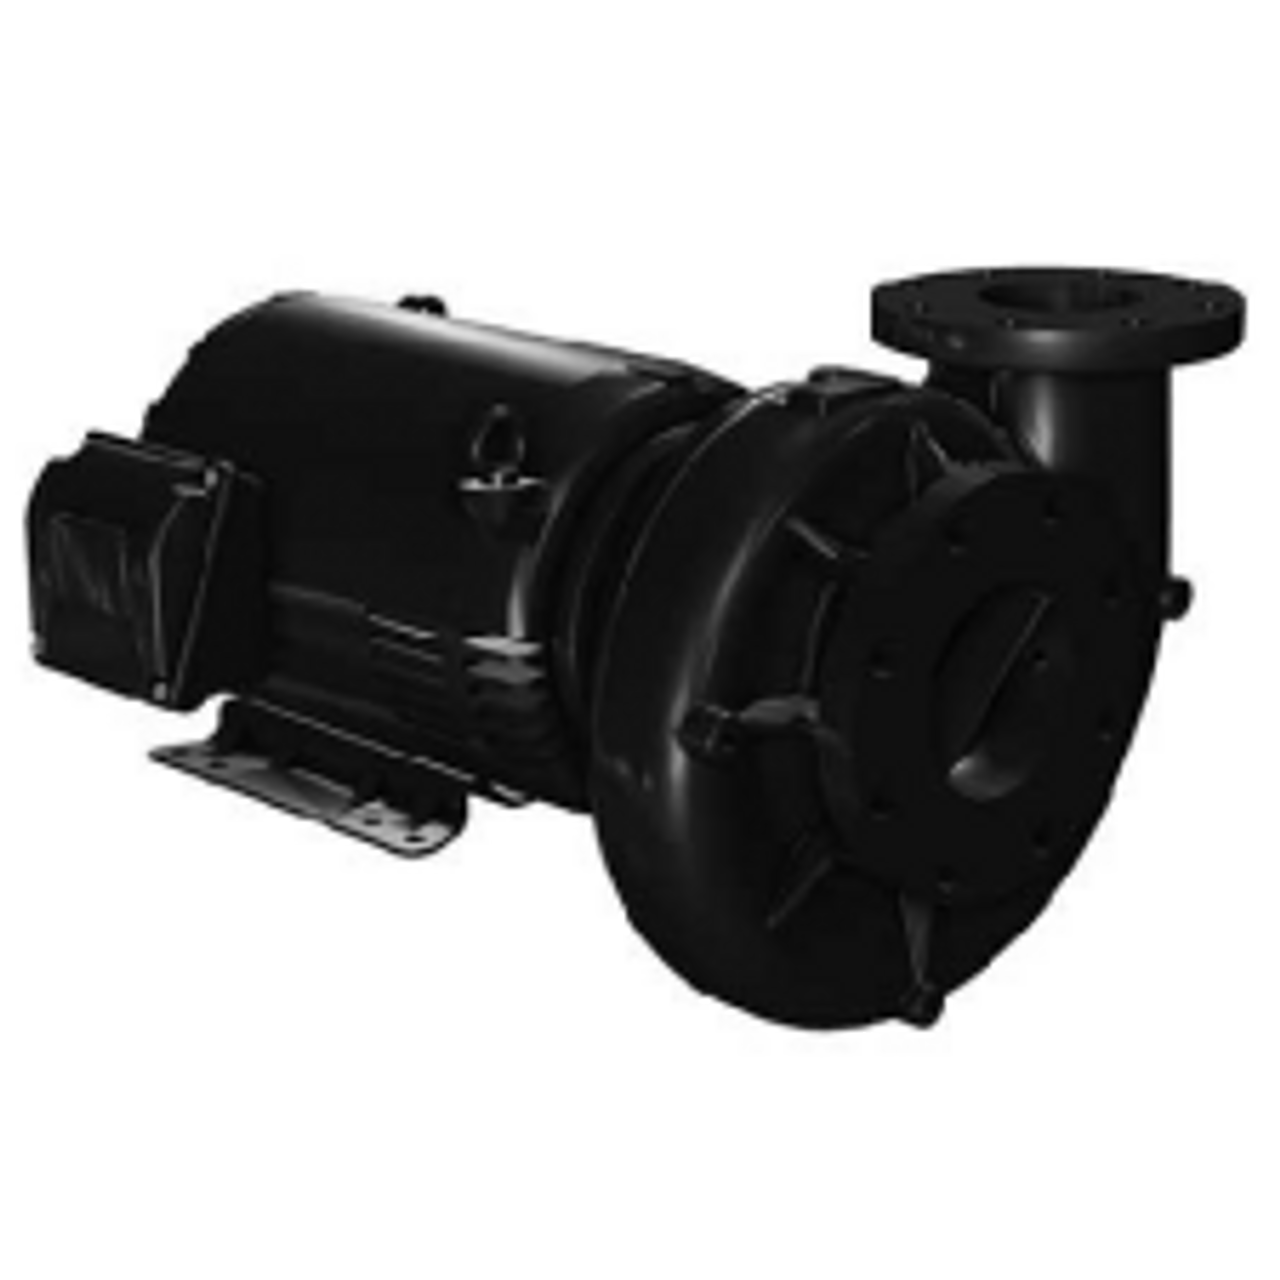 Paco Pump - 6"x 5"- 7.9", 15hp, 460vt, 1760rpm - Custom Fabricated for direct replacement of MGM Lazy River Motivation Pumps